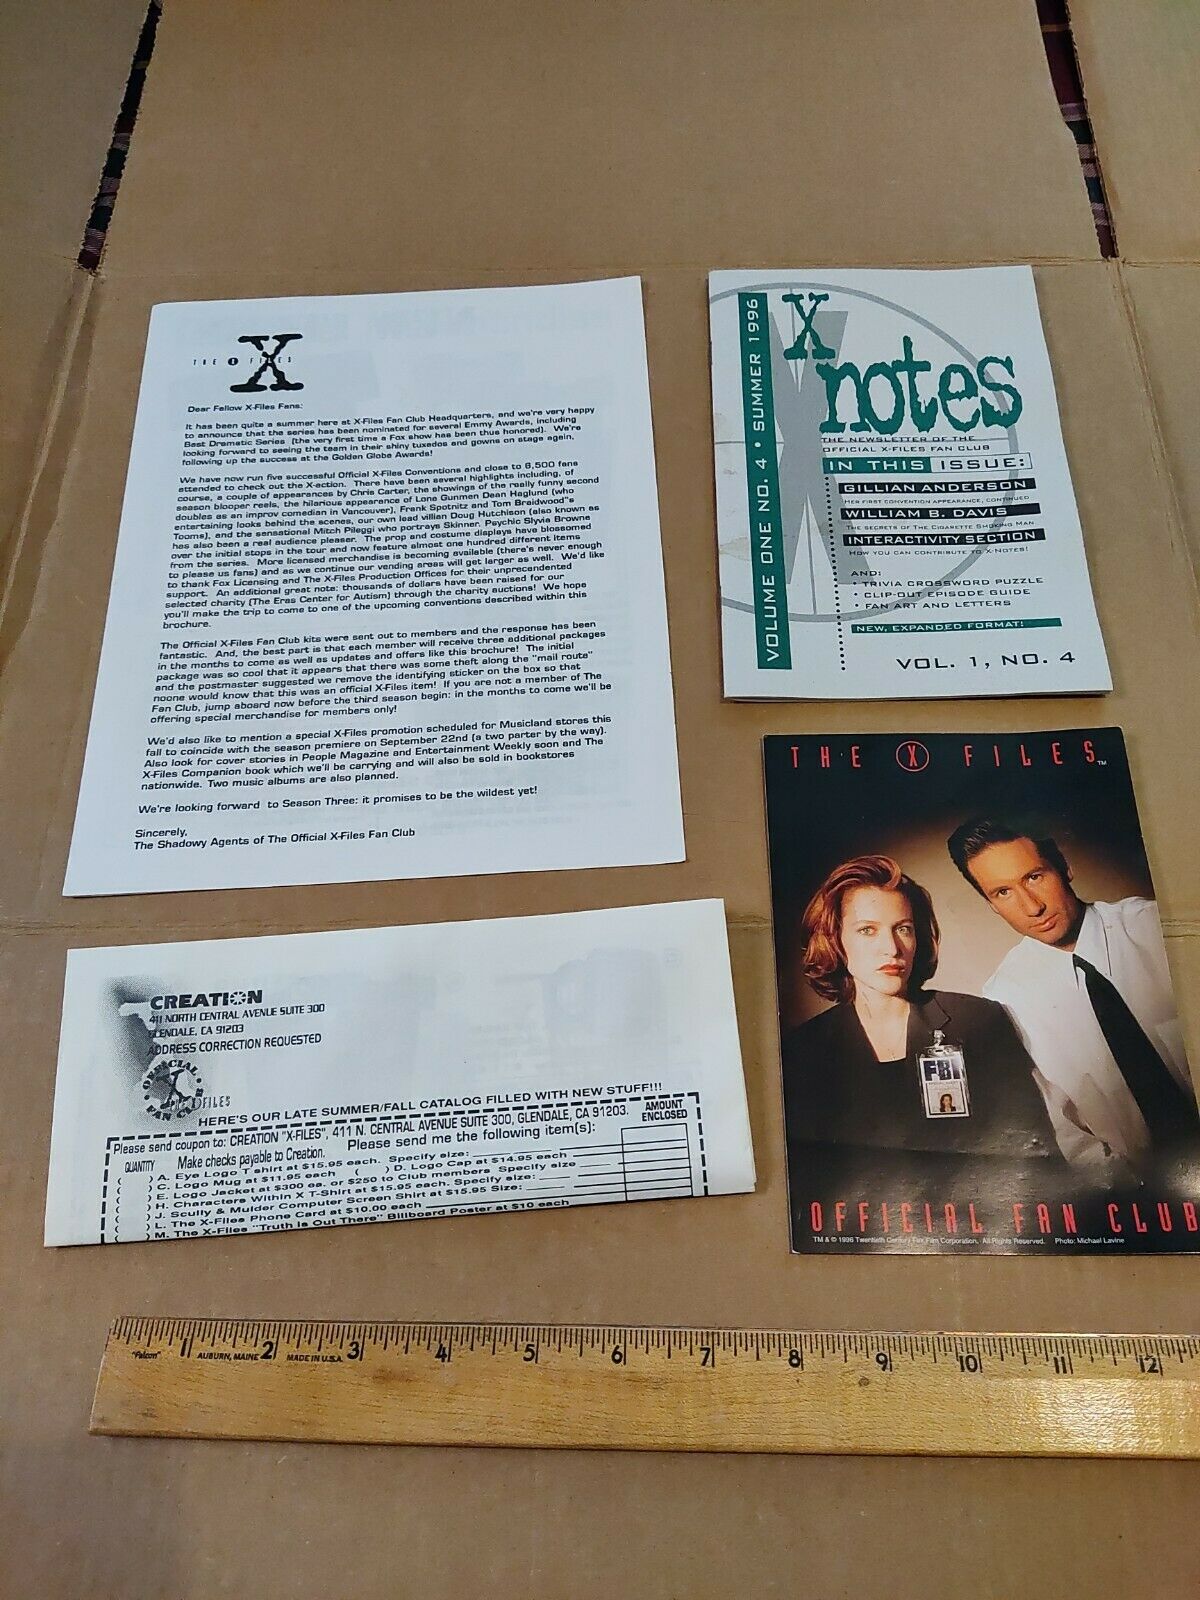 1995 X-files Fan Club Lot Photo Newsletter X-notes Magazine Volume 1 Number 4